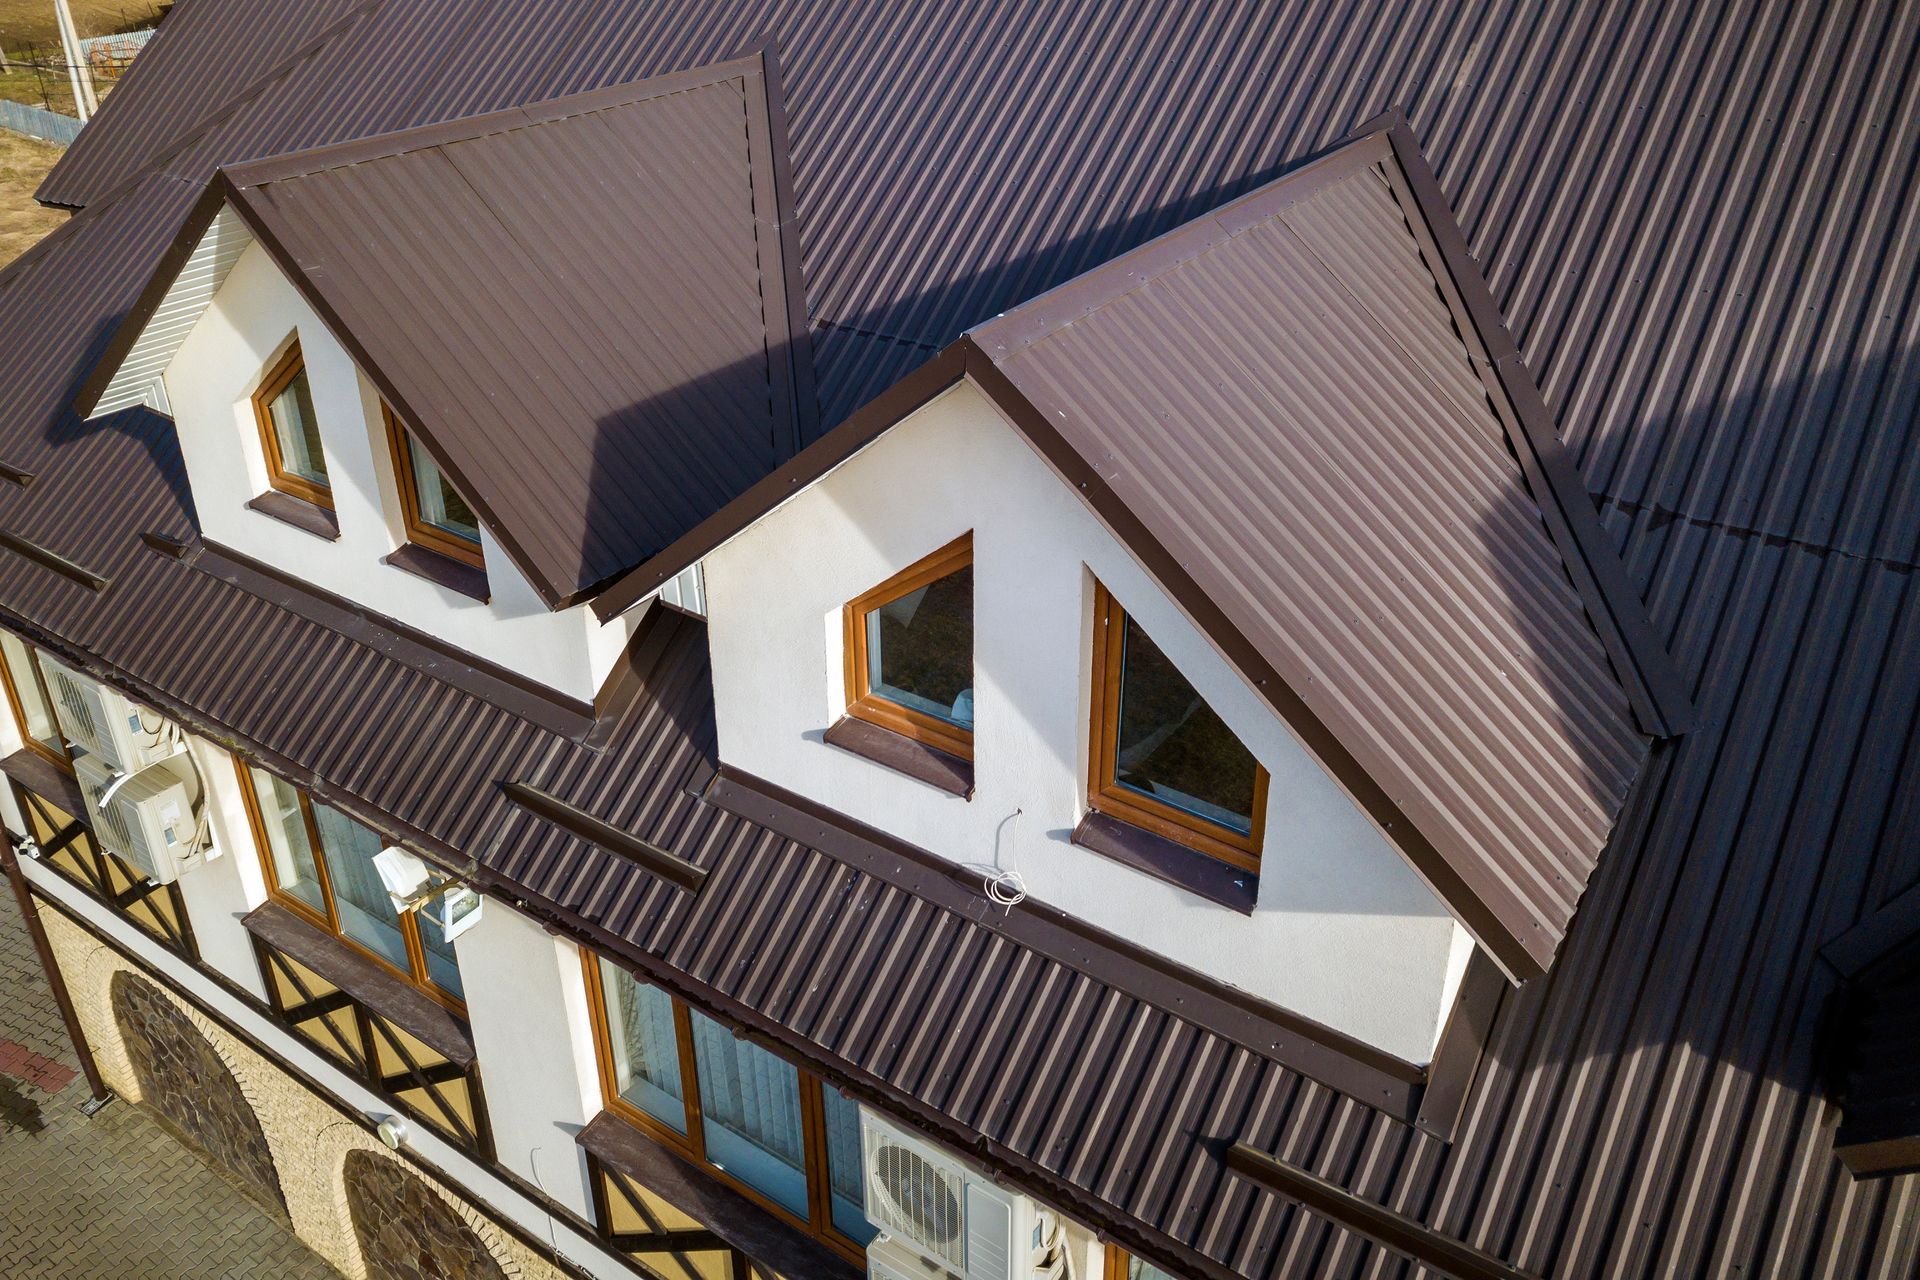 Roofing Services in Baton Rouge: The Advantages of Standing Seam Metal Roofing